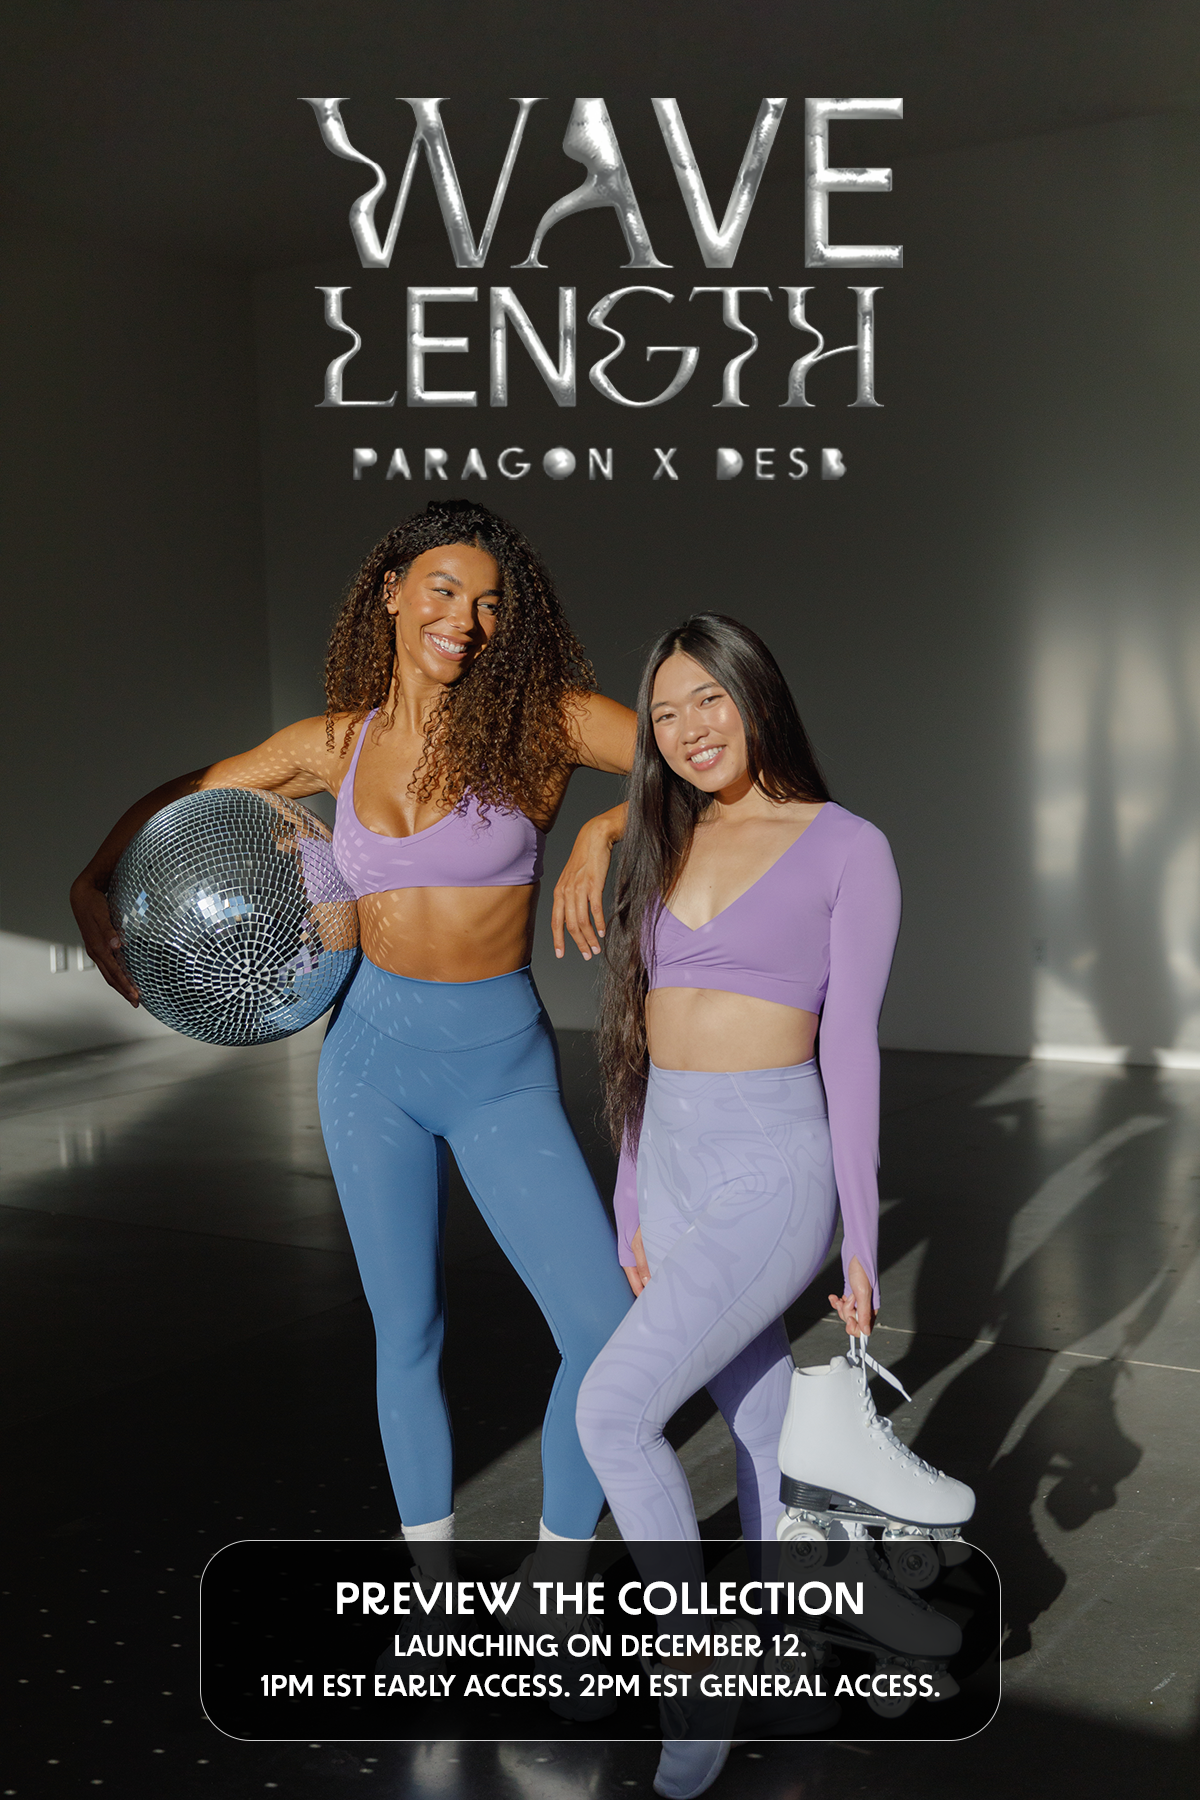 Paragon Fitwear: In our hot girl era